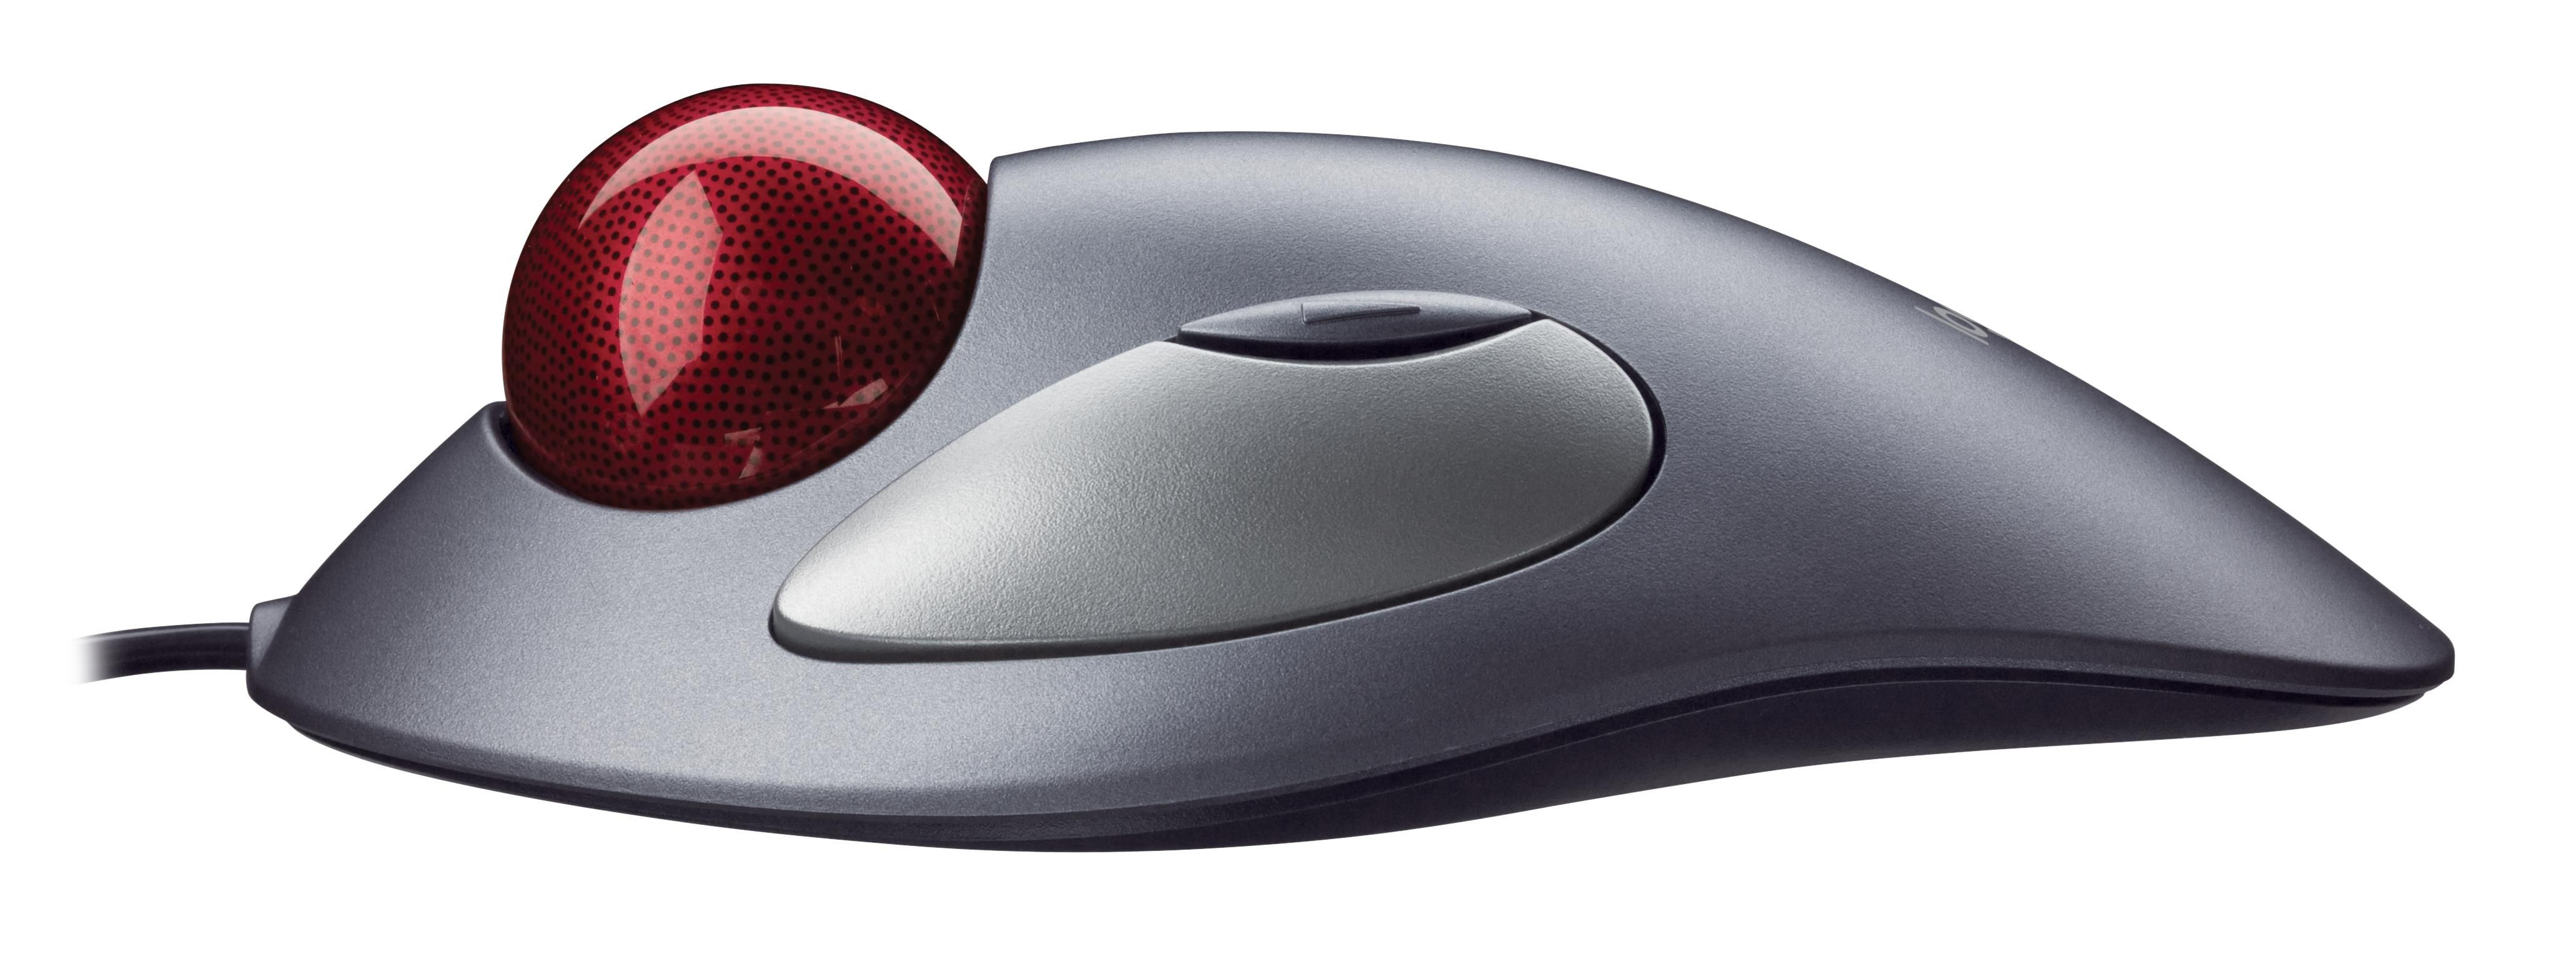 logitech marble mouse driver for mac